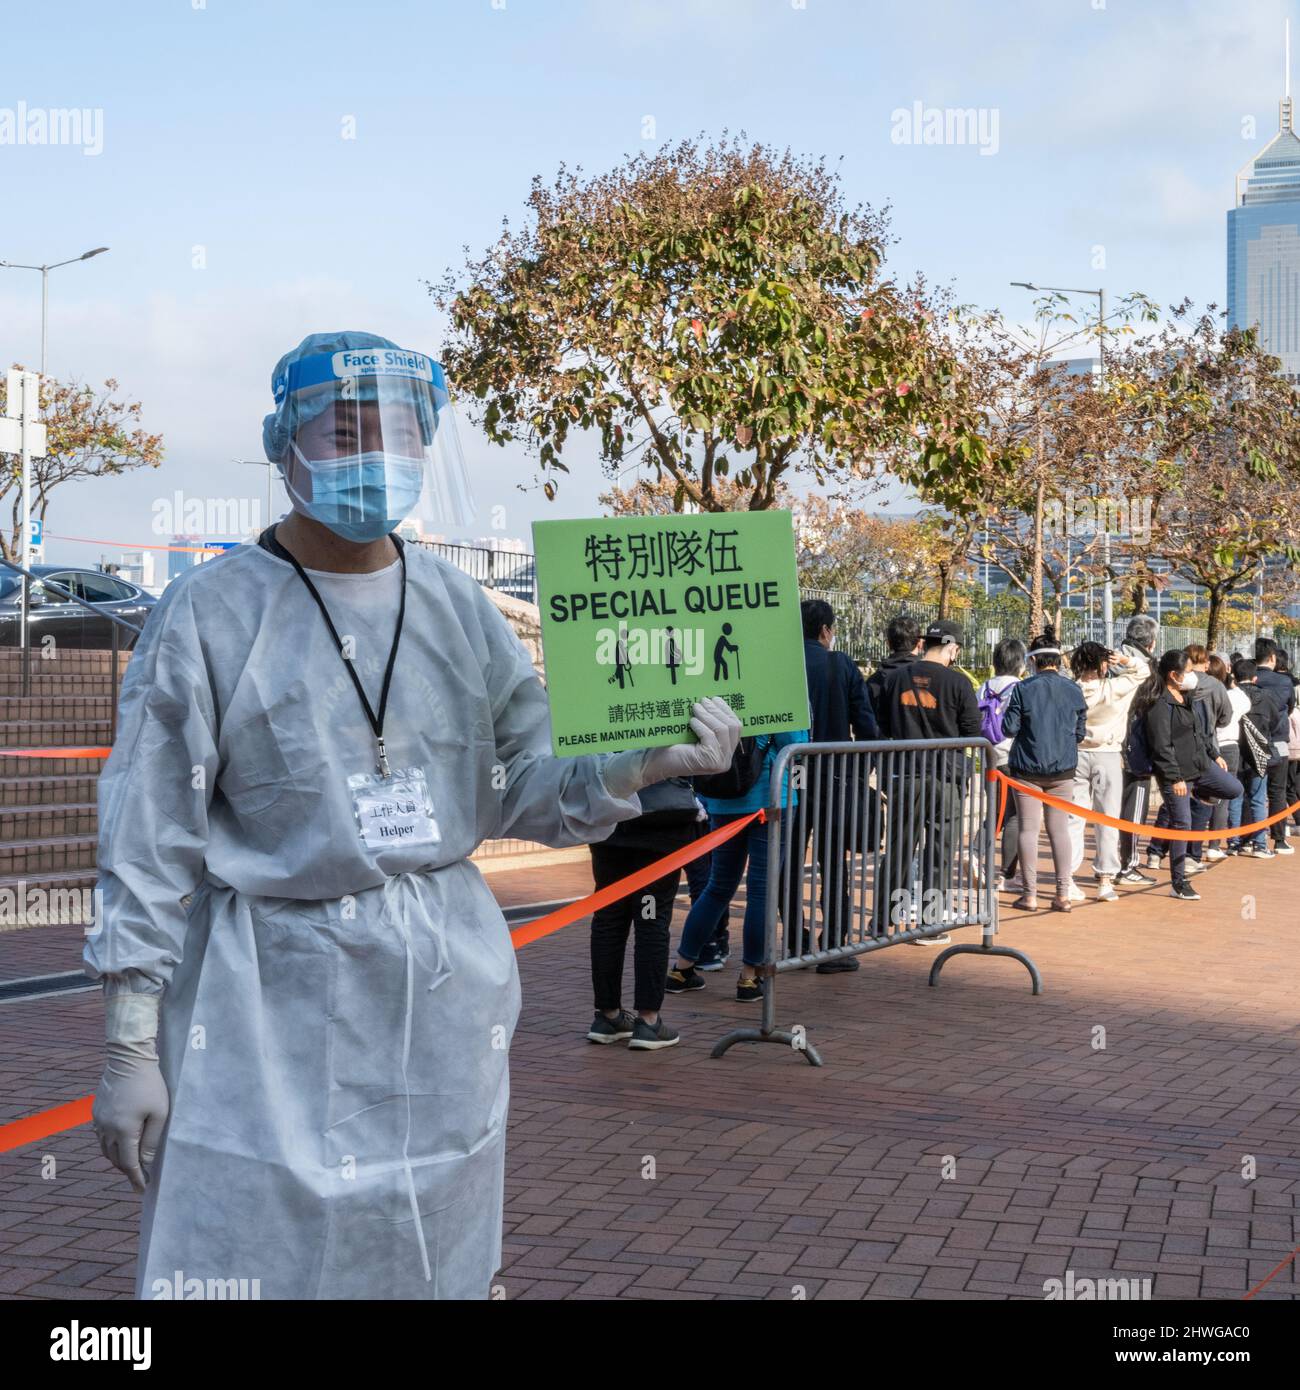 Zero Covid Hong Kong. Omicron.  2022. Hong Kong residents line up for mandatory government Covid 19 testing in the CentralBusinessDistrict. Stock Photo